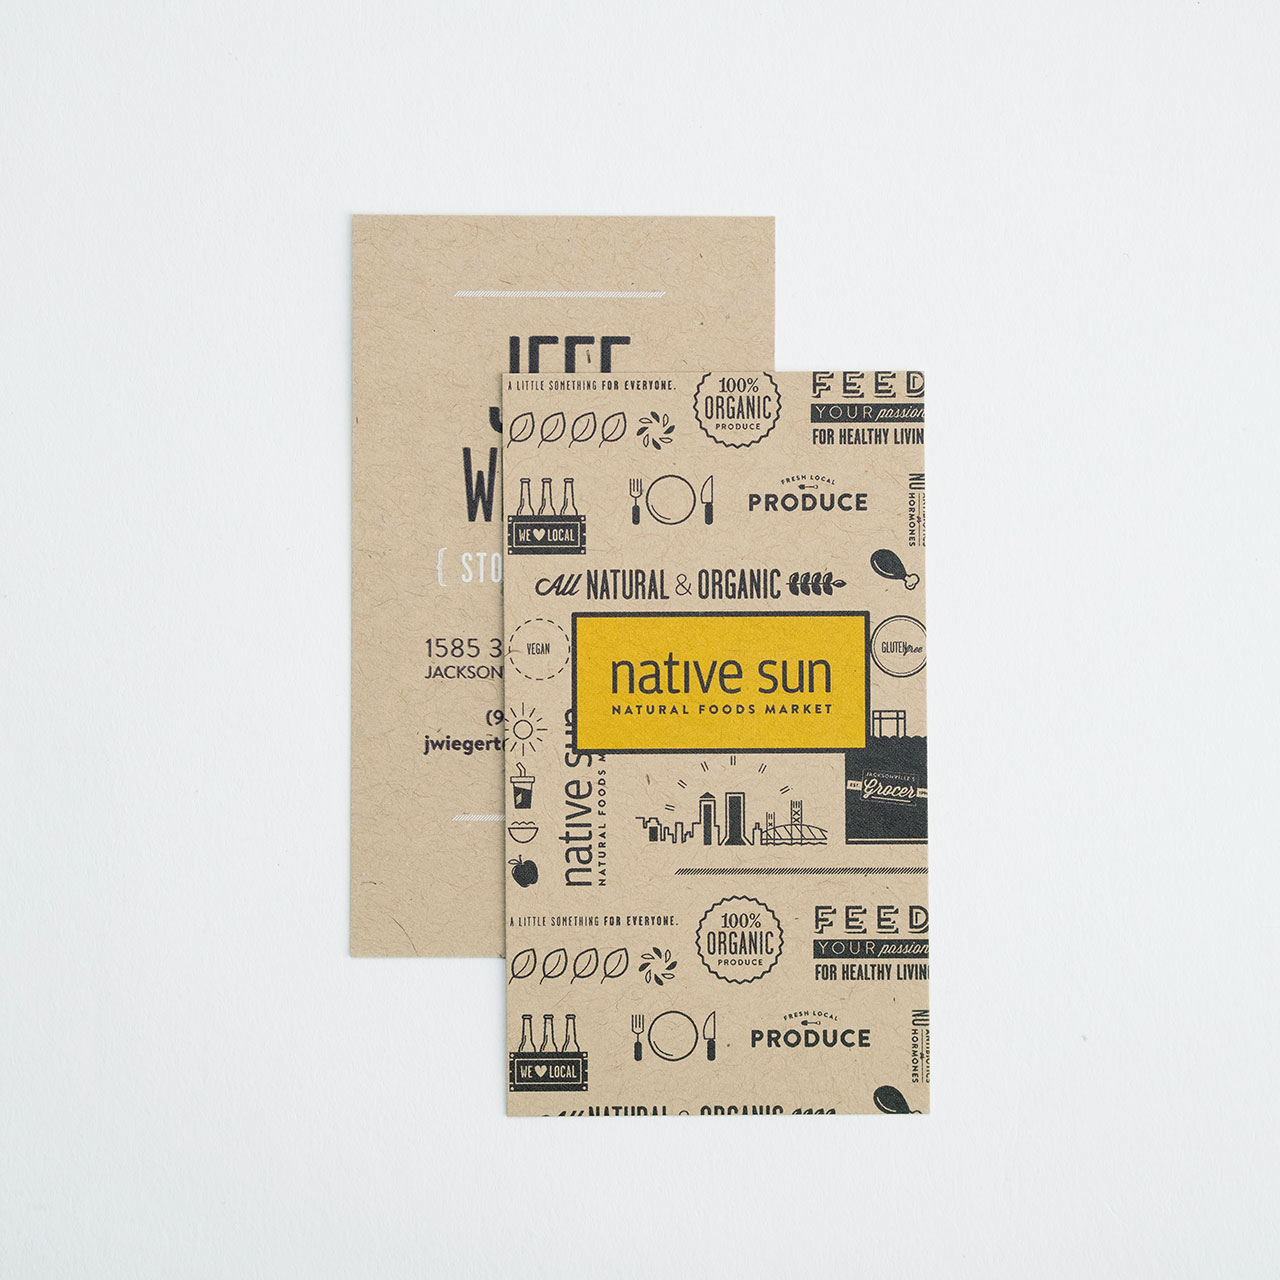 Two unique business cards printed on kraft paper stock with a yellow and black design.